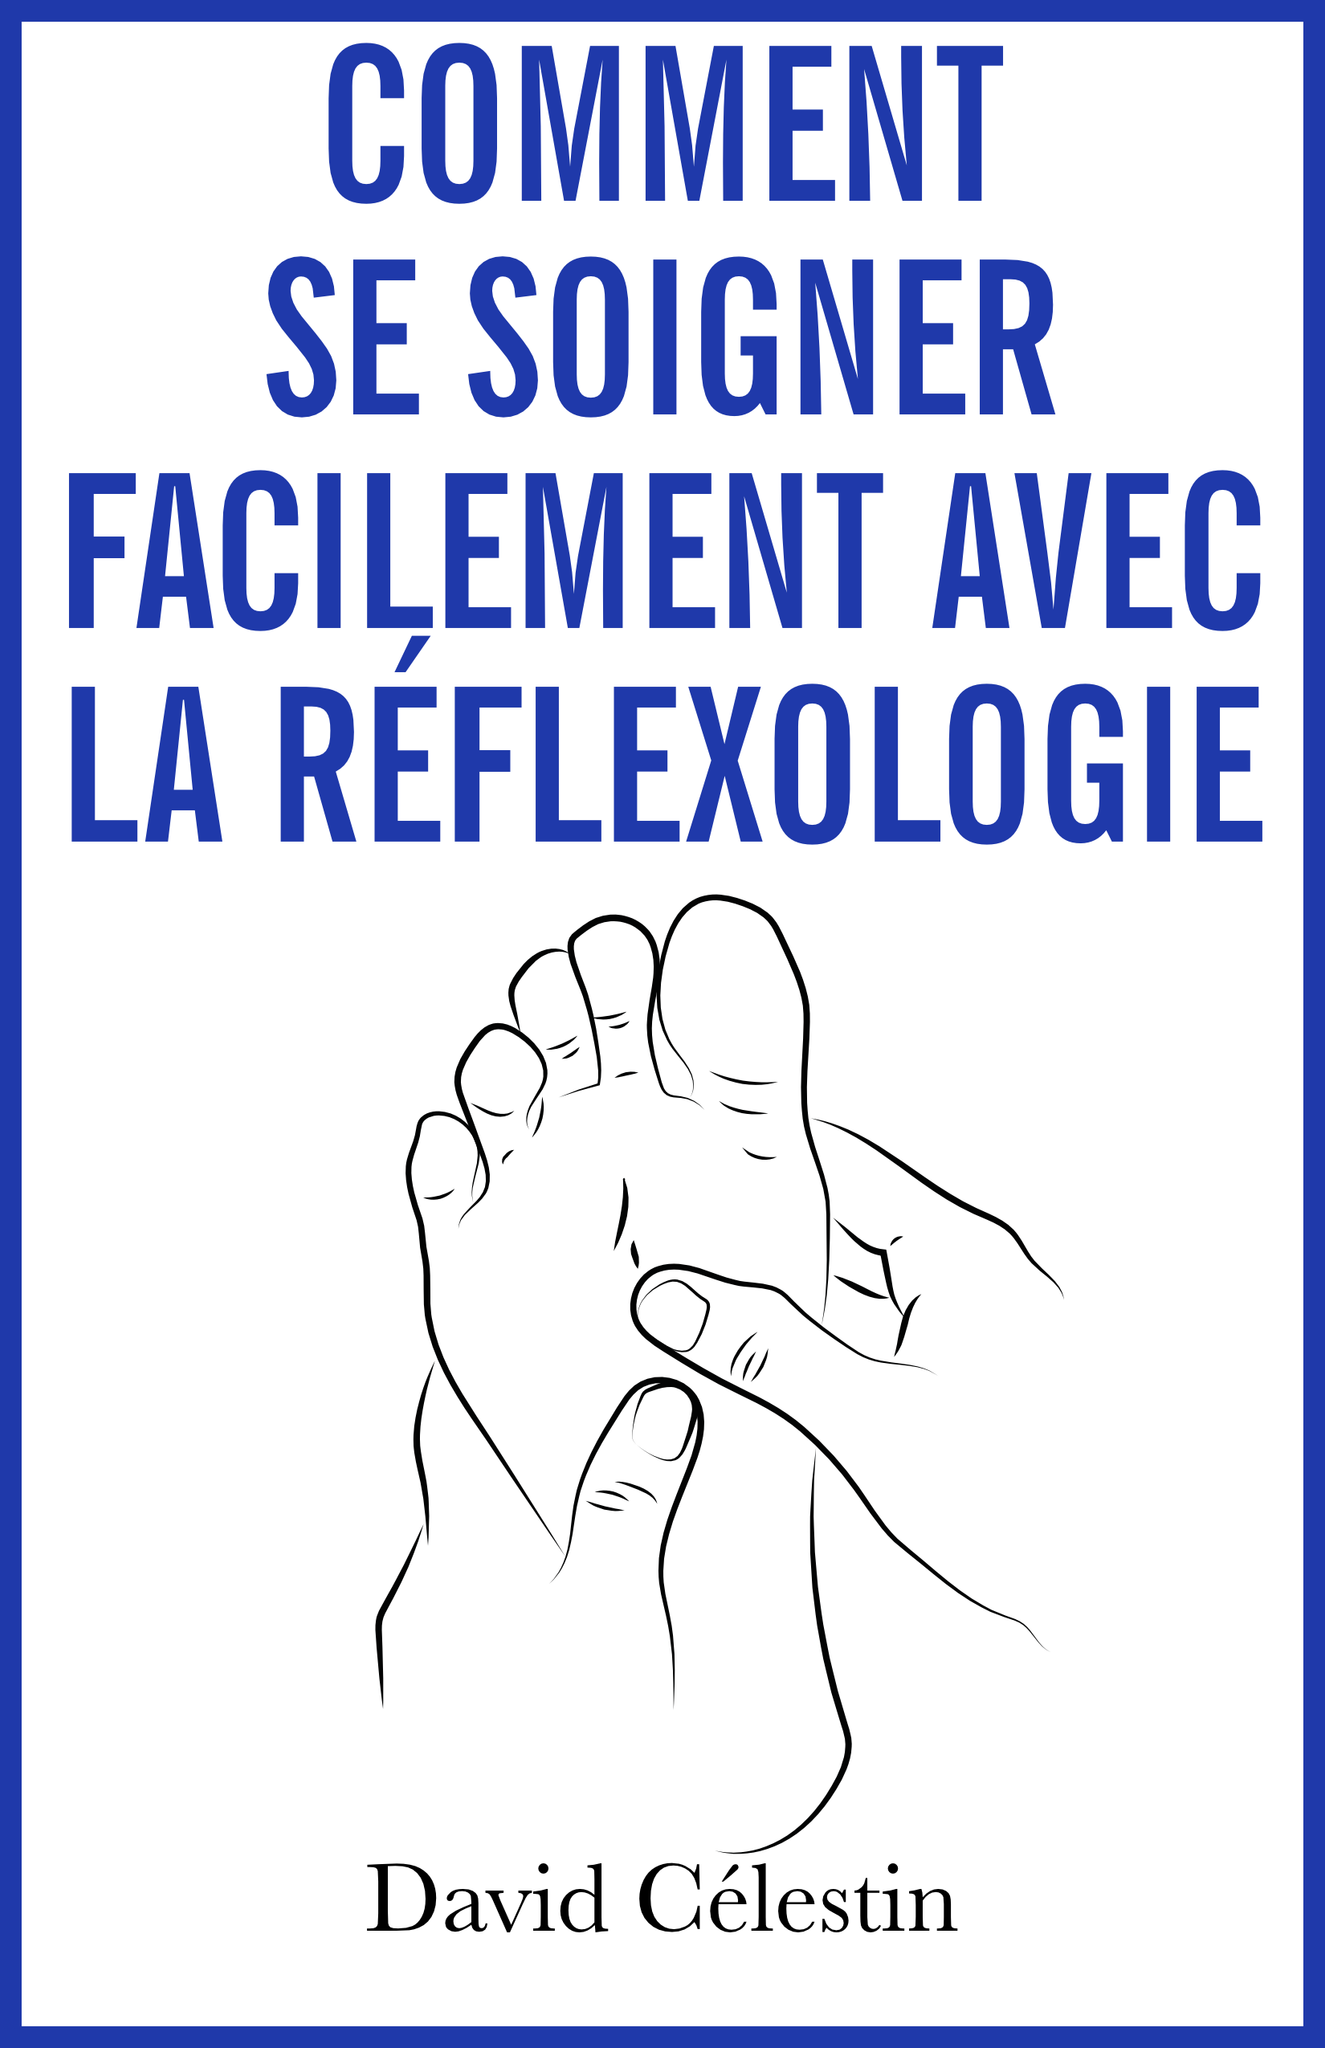 How to heal yourself easily with reflexology - paper